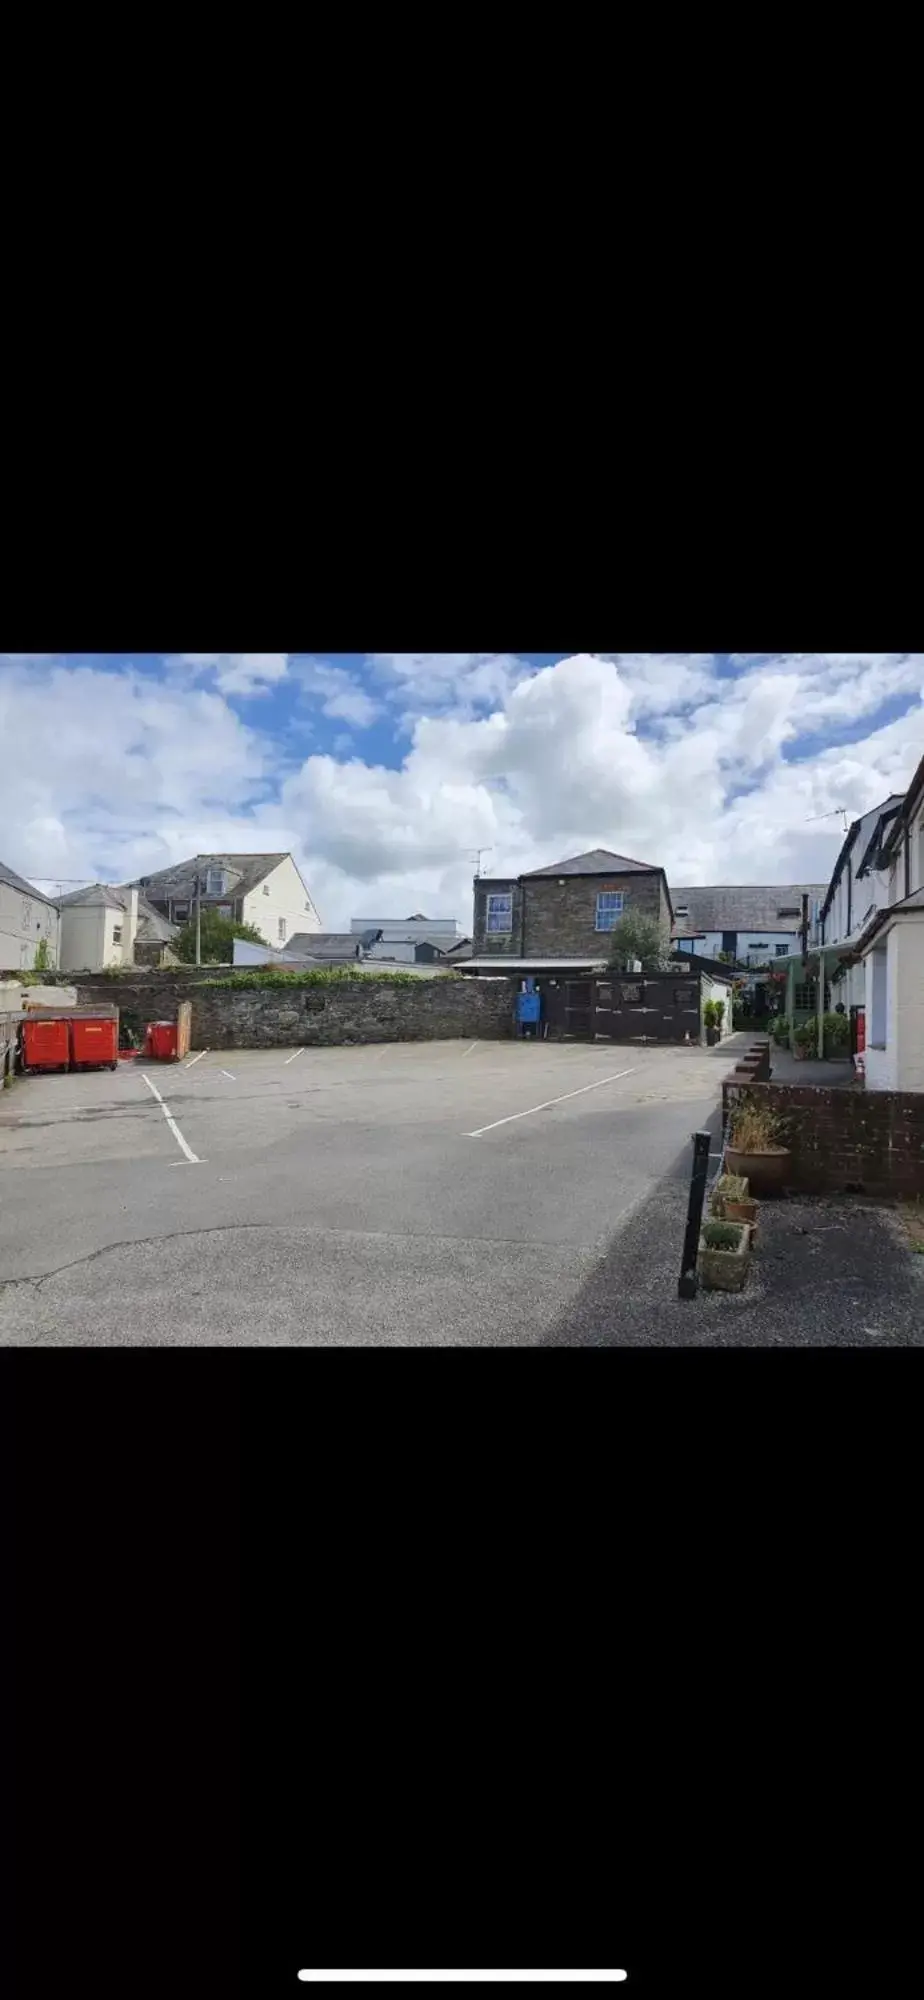 Parking in Molesworth Arms